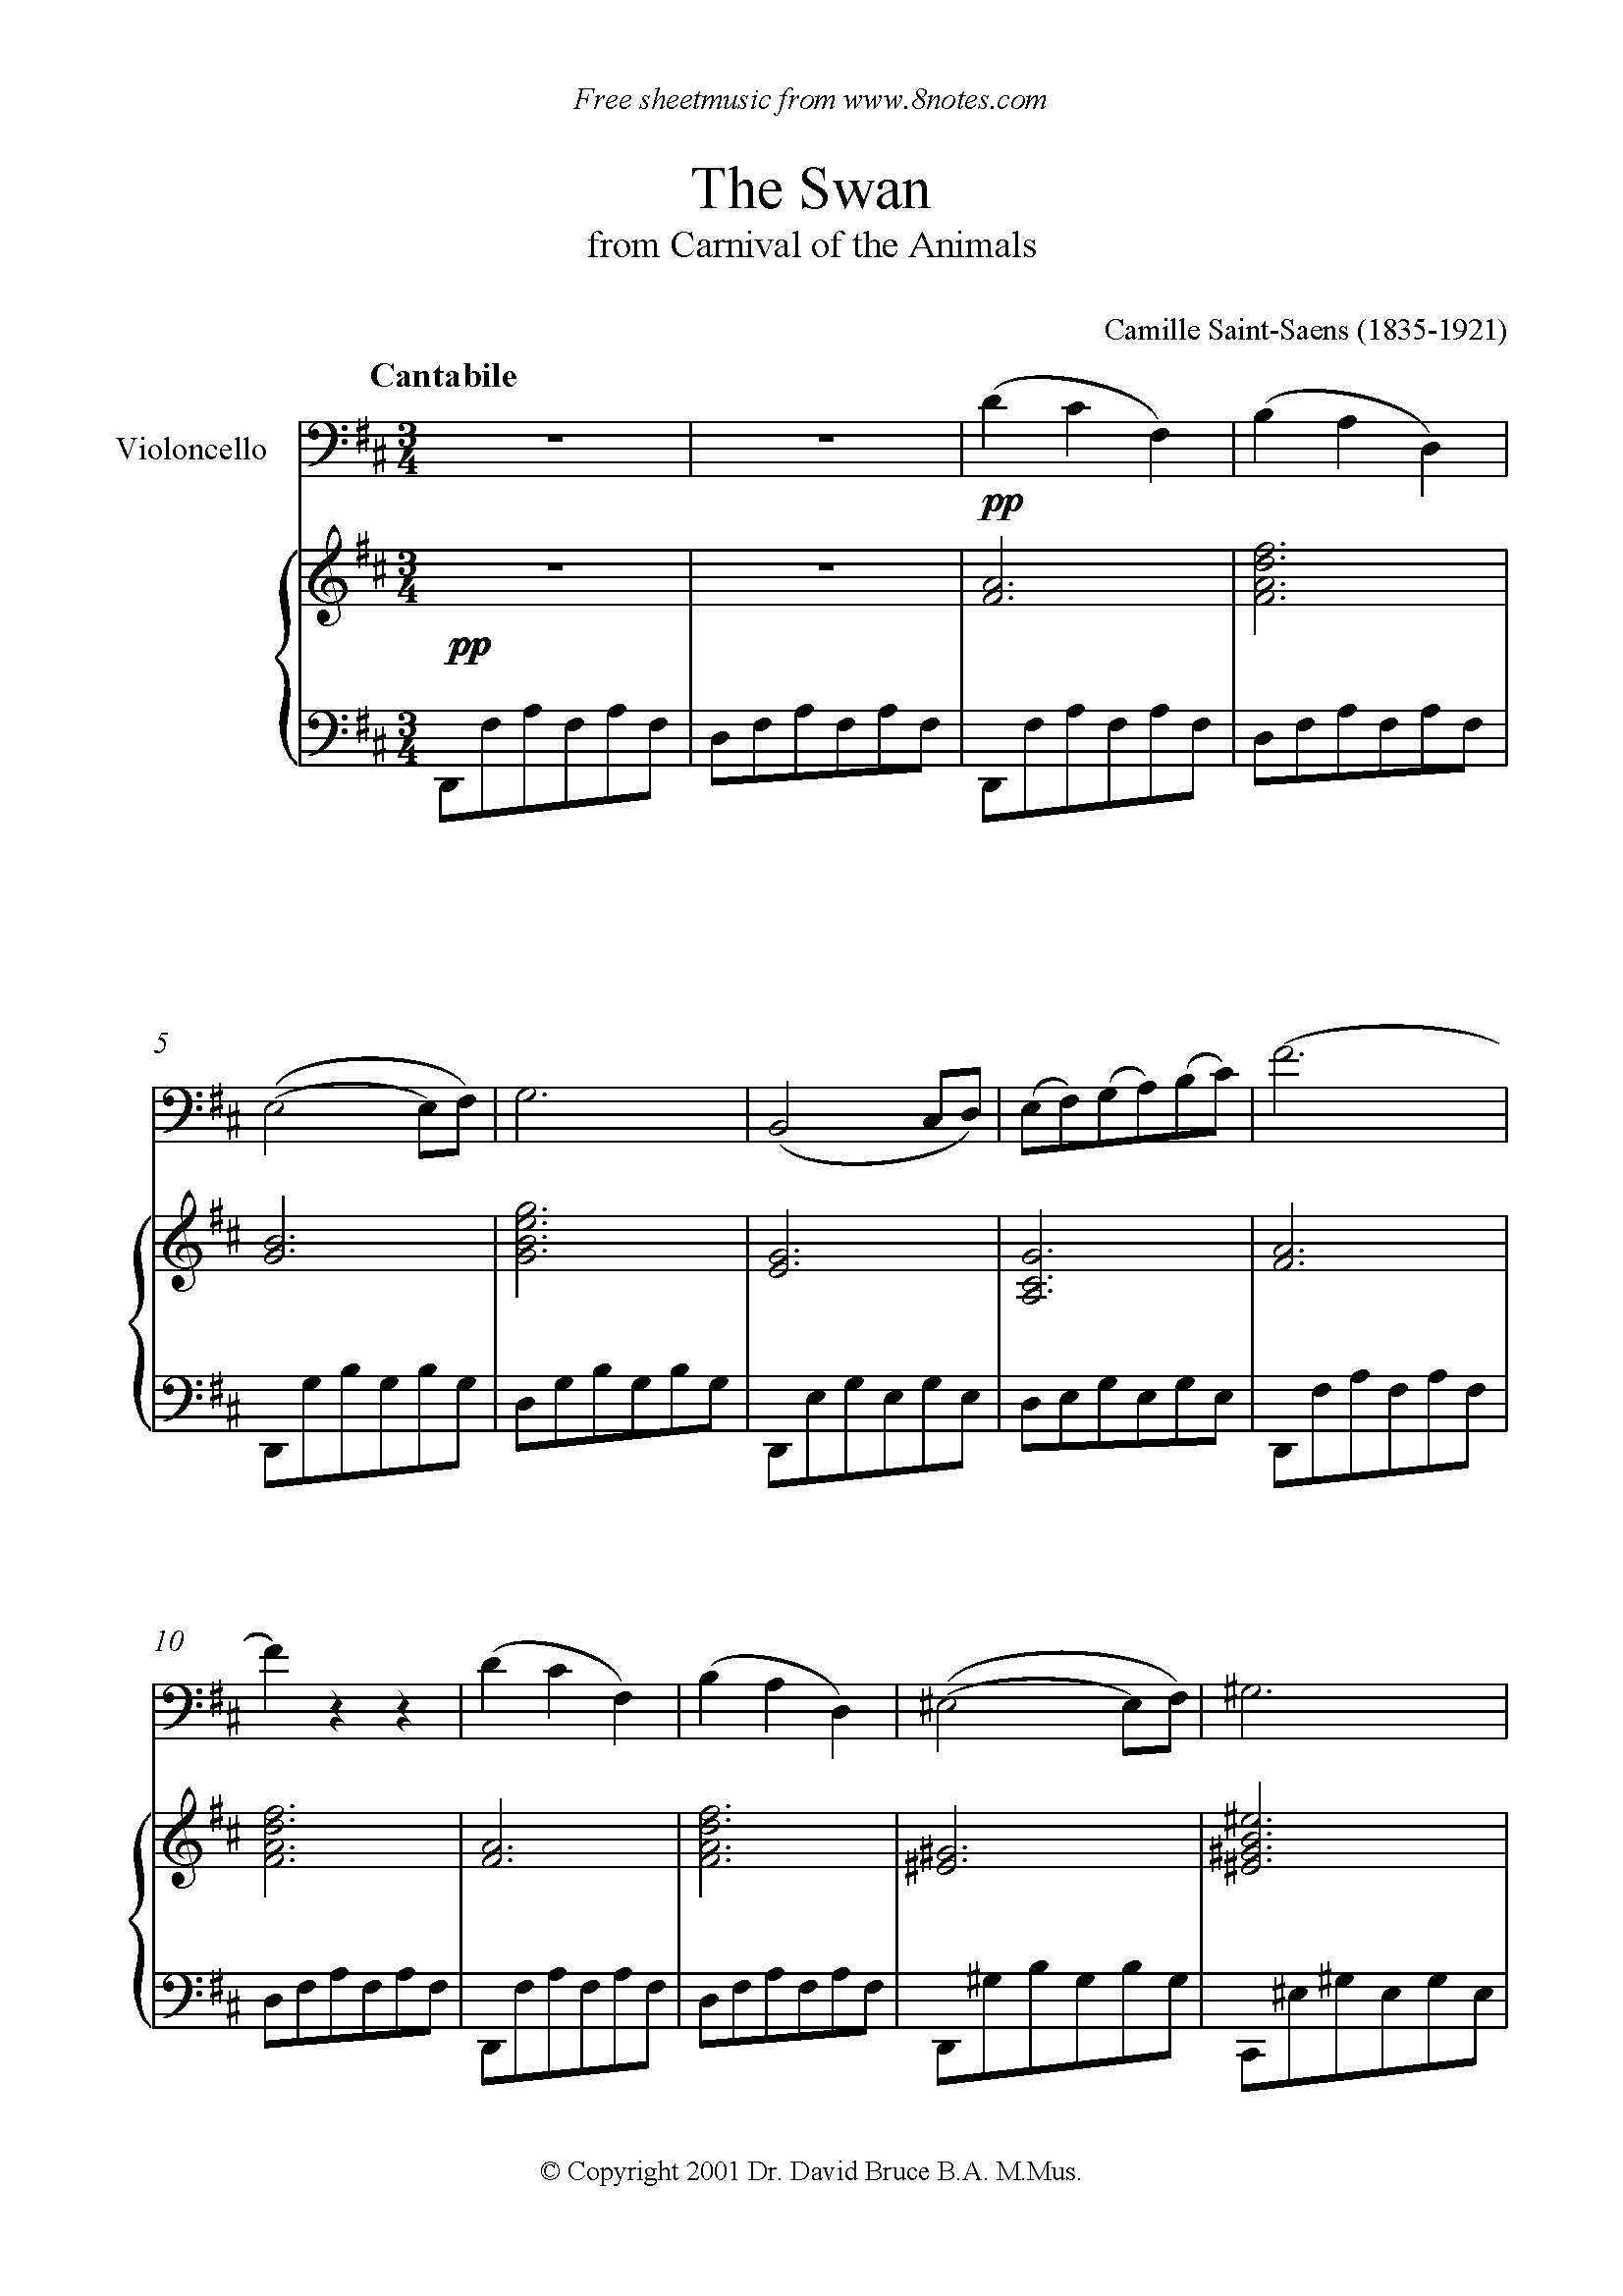 saint-sa-ns-the-swan-from-carnival-of-the-animals-sheet-music-for-cello-8notes